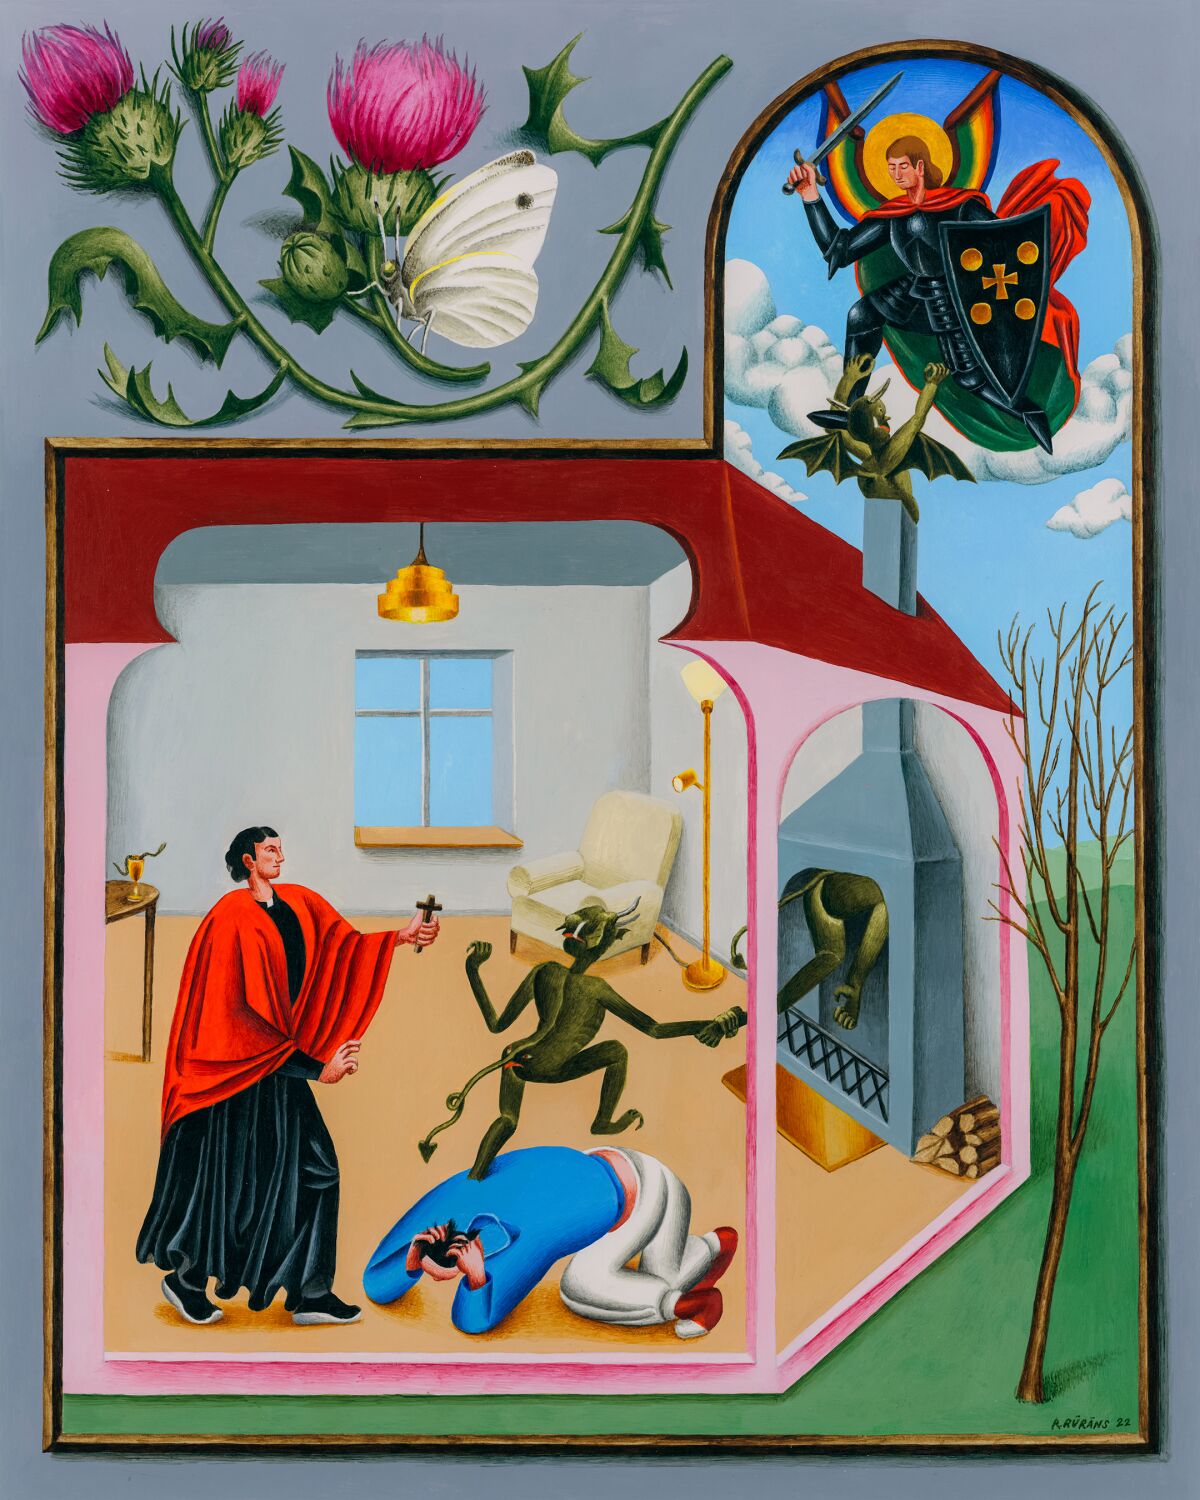 Illustration of a priest exorcising demons from a person.